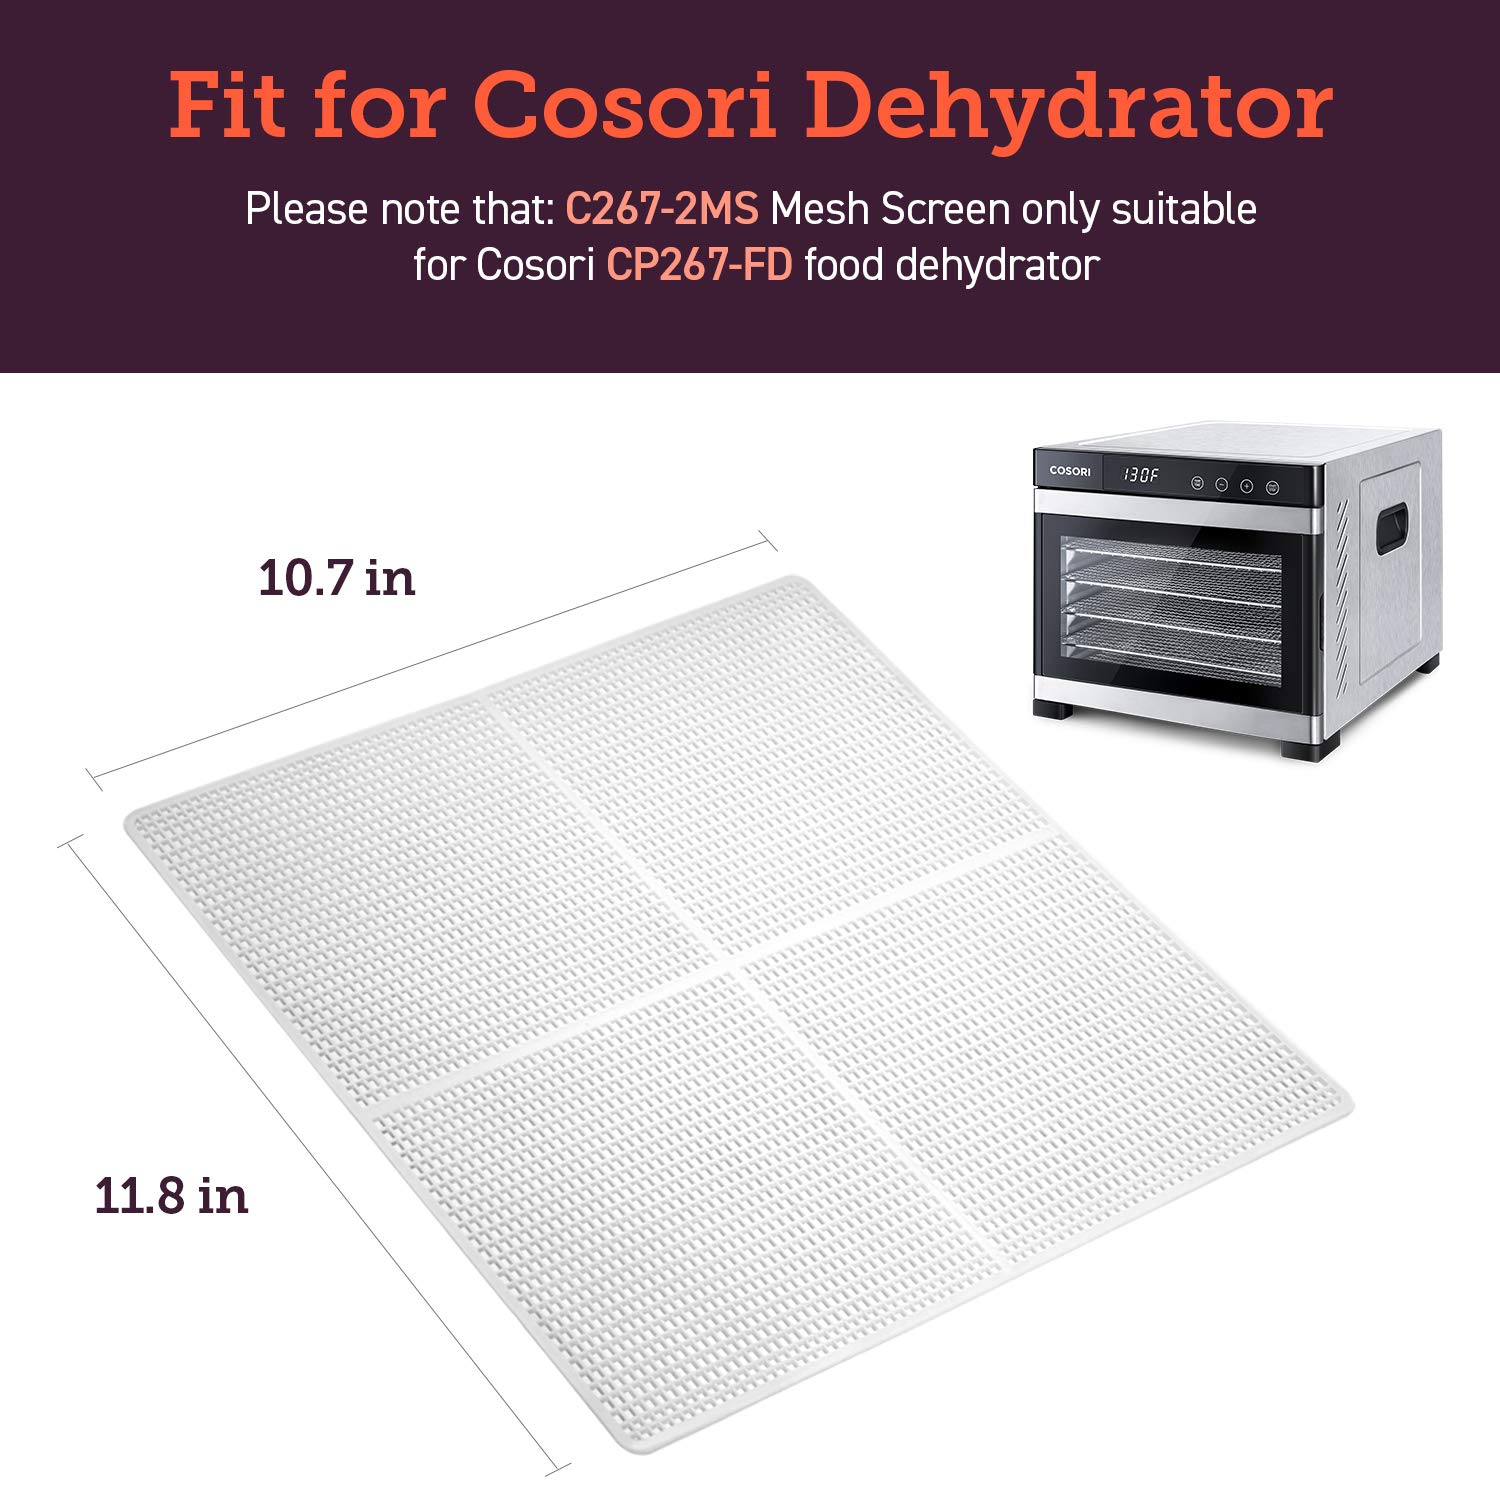 COSORI Premium Dehydrator with 6 Stainless Steel Trays in Stainless Steel  Silver - (SHIPS IN 1-2 WEEKS)